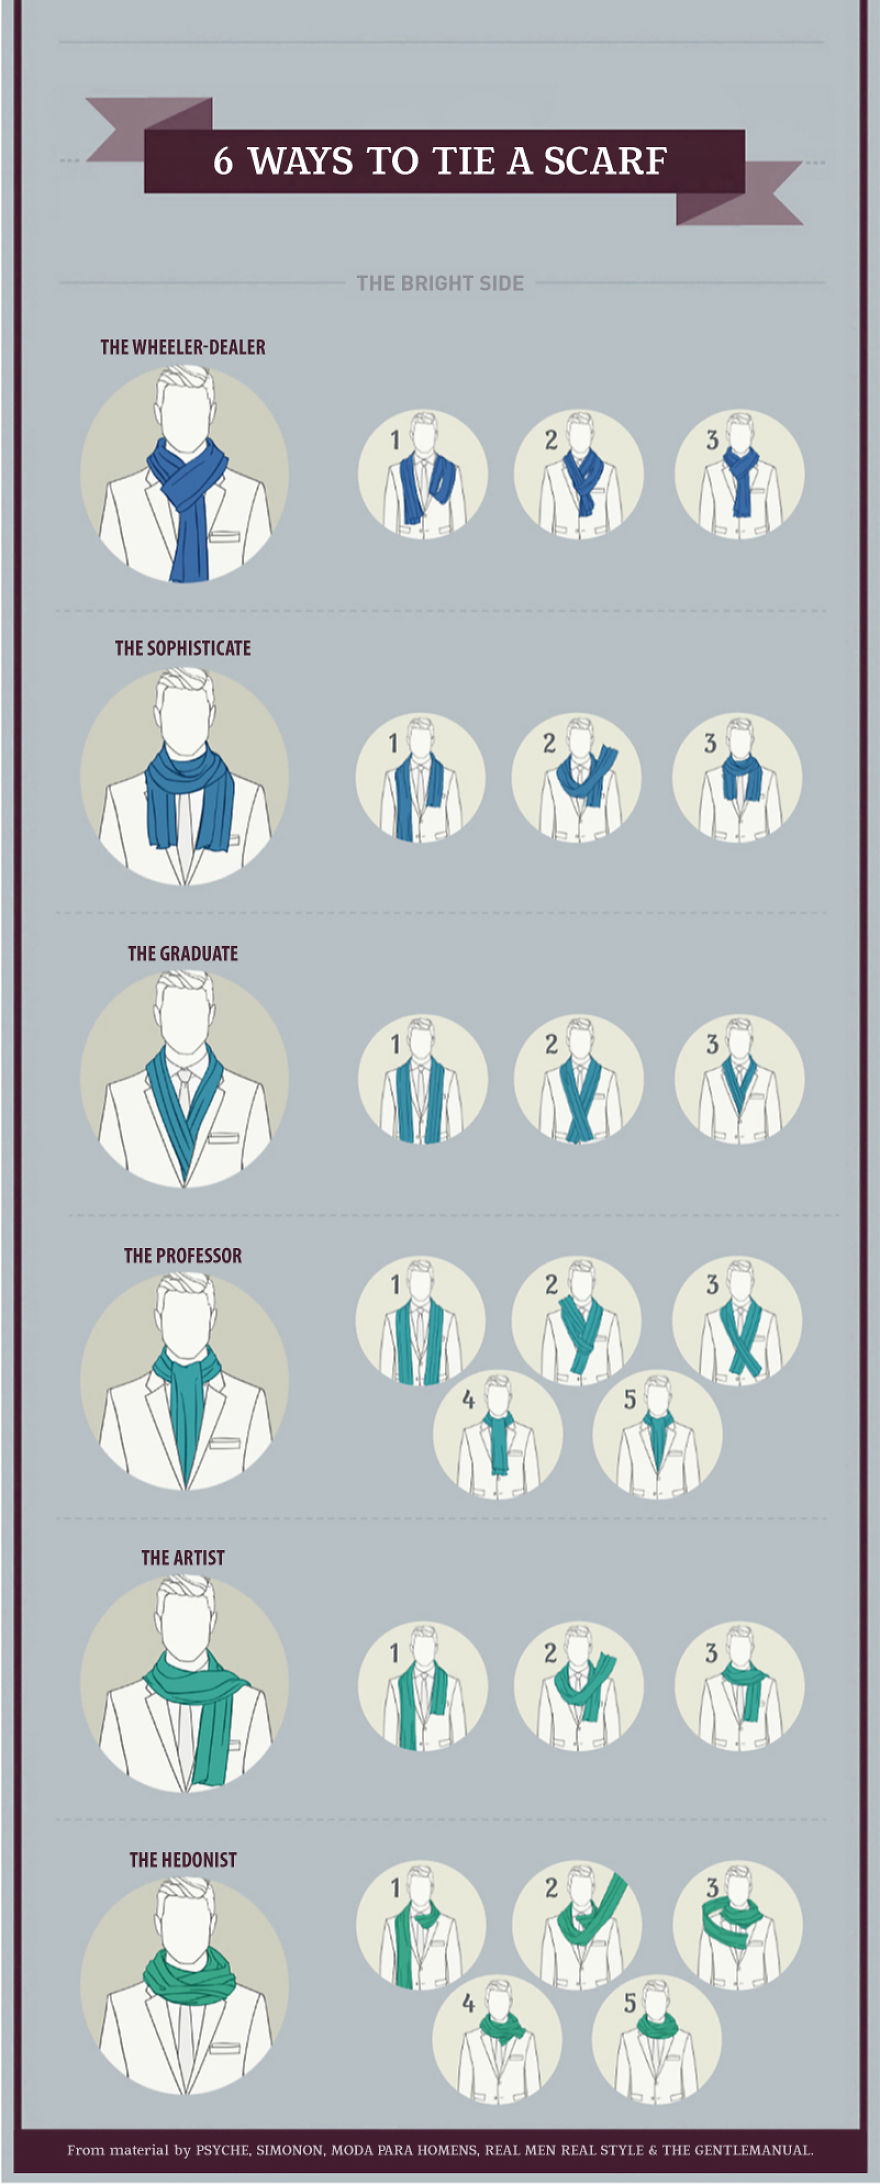 The Only Guide Men Need To Get Dressed